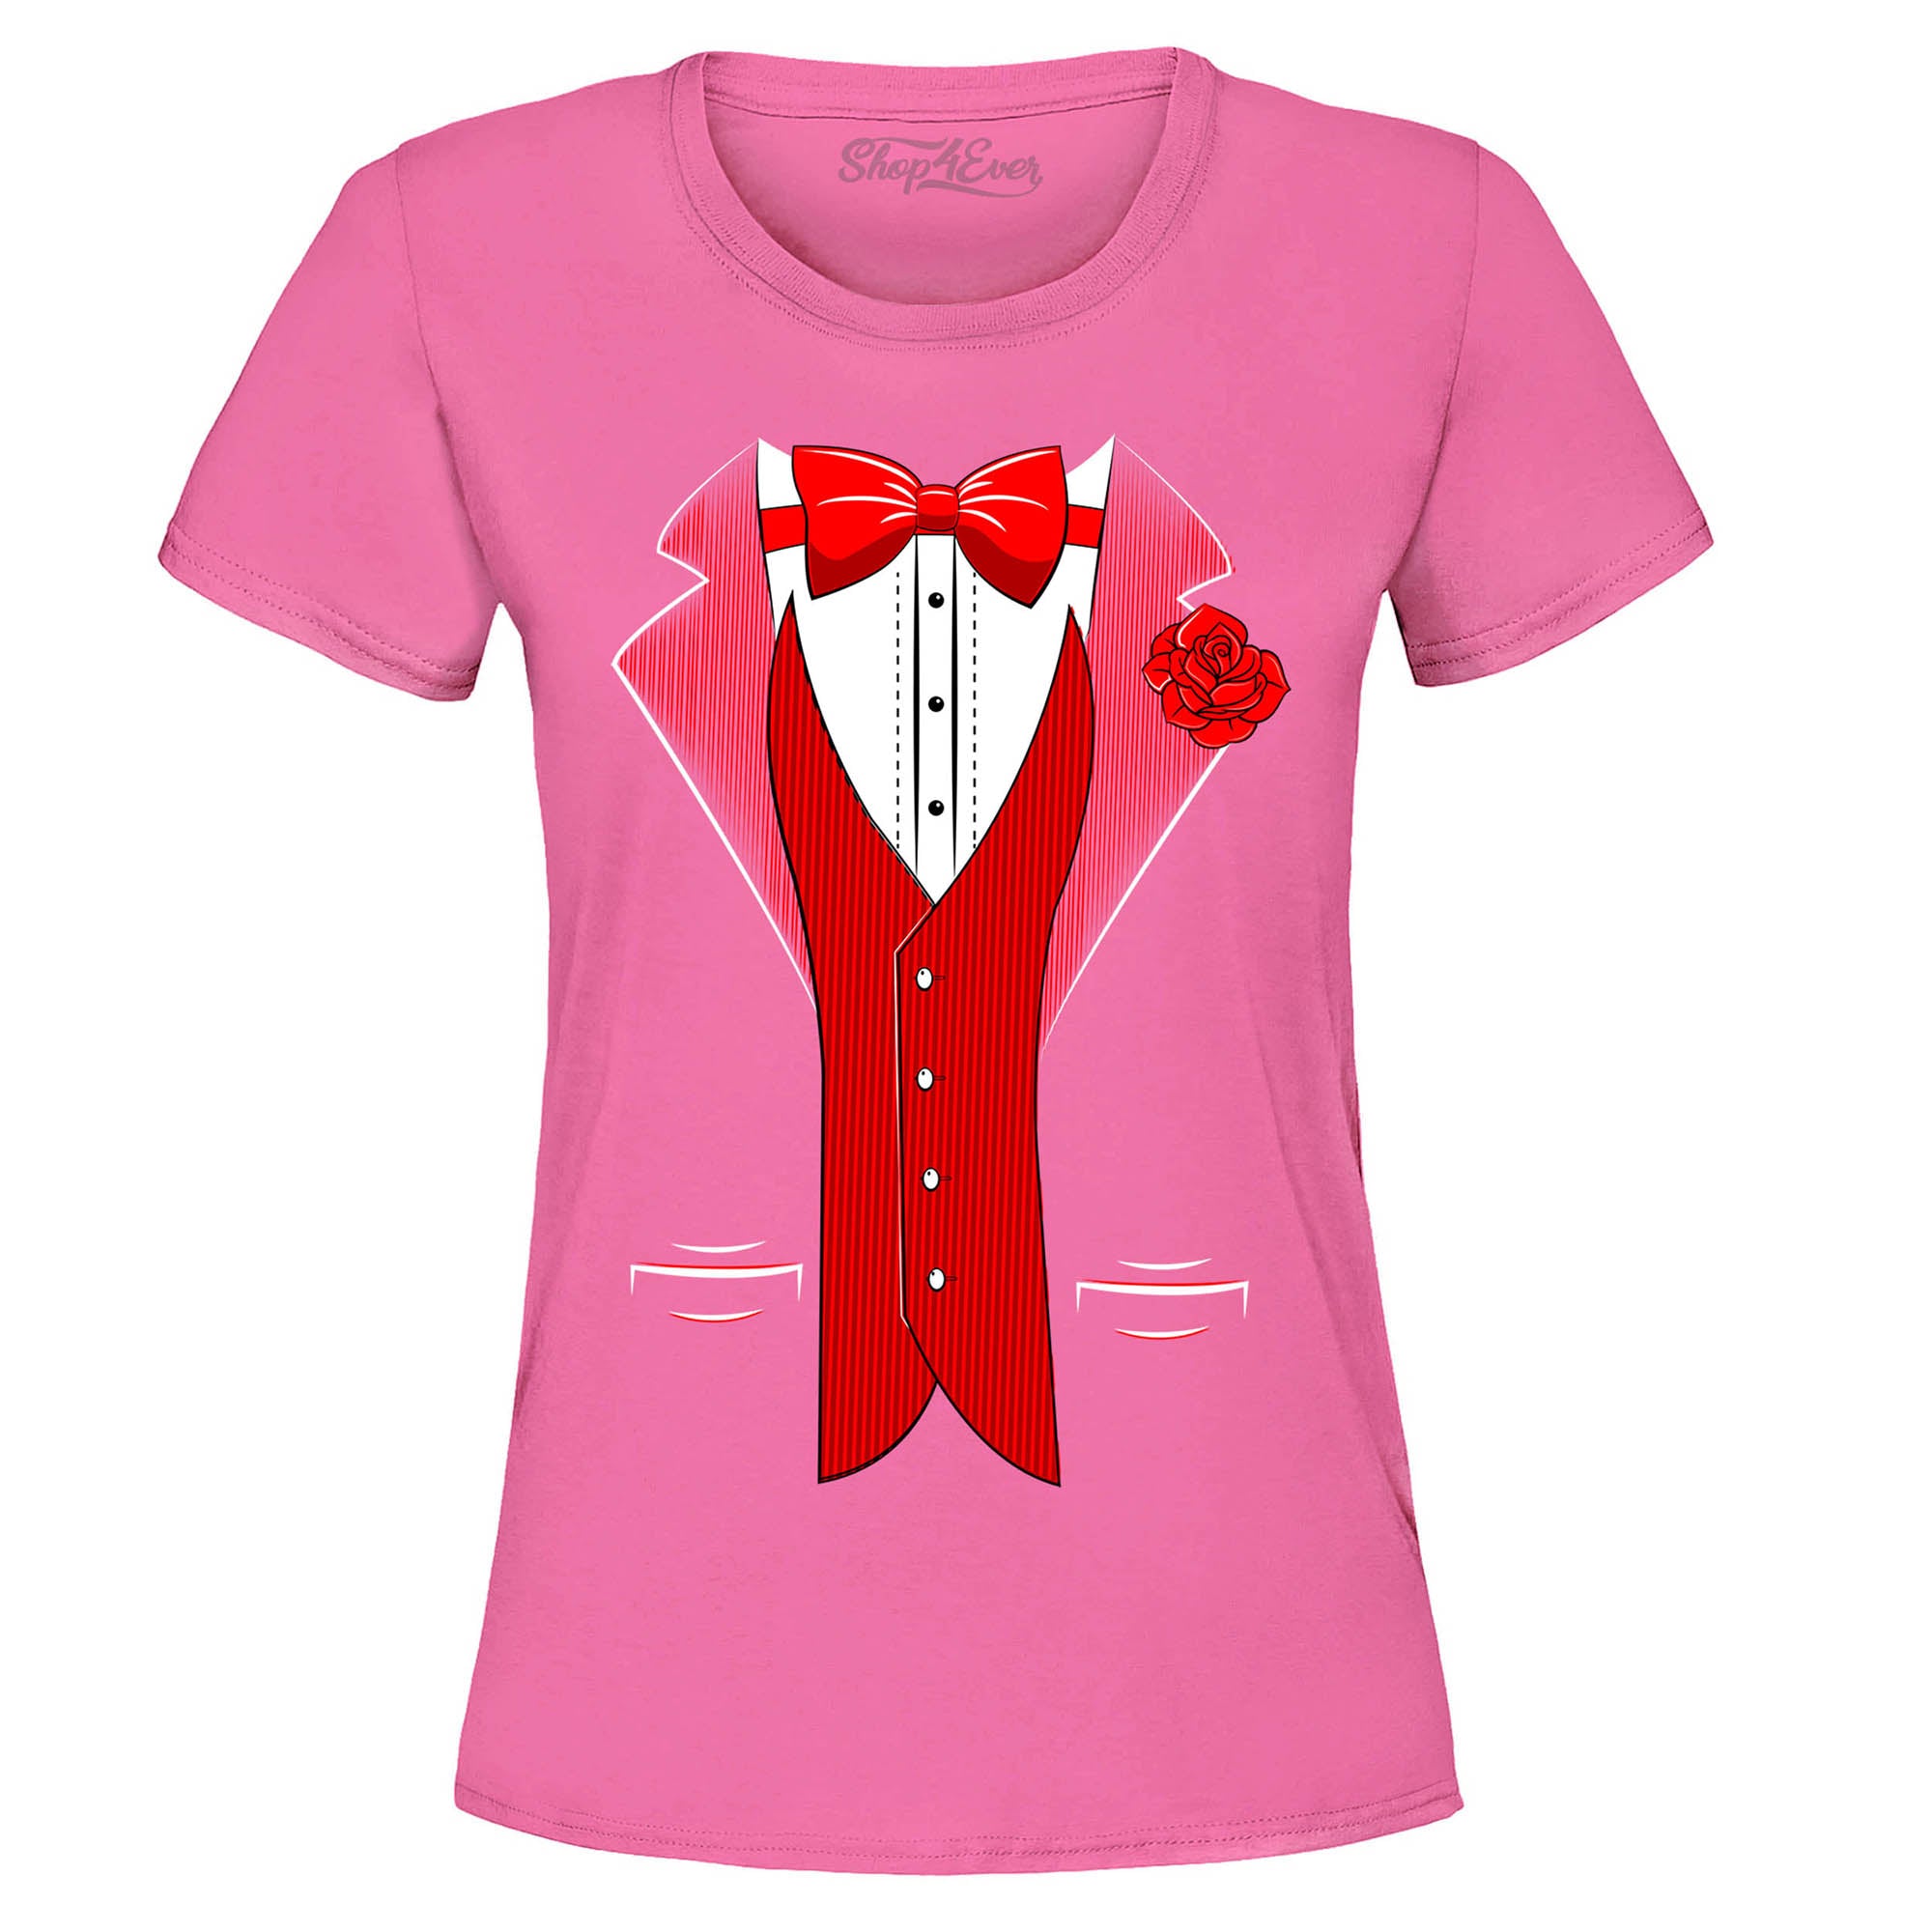 Classic Tuxedo with Red Rose Women's T-Shirt Party Costume Shirts